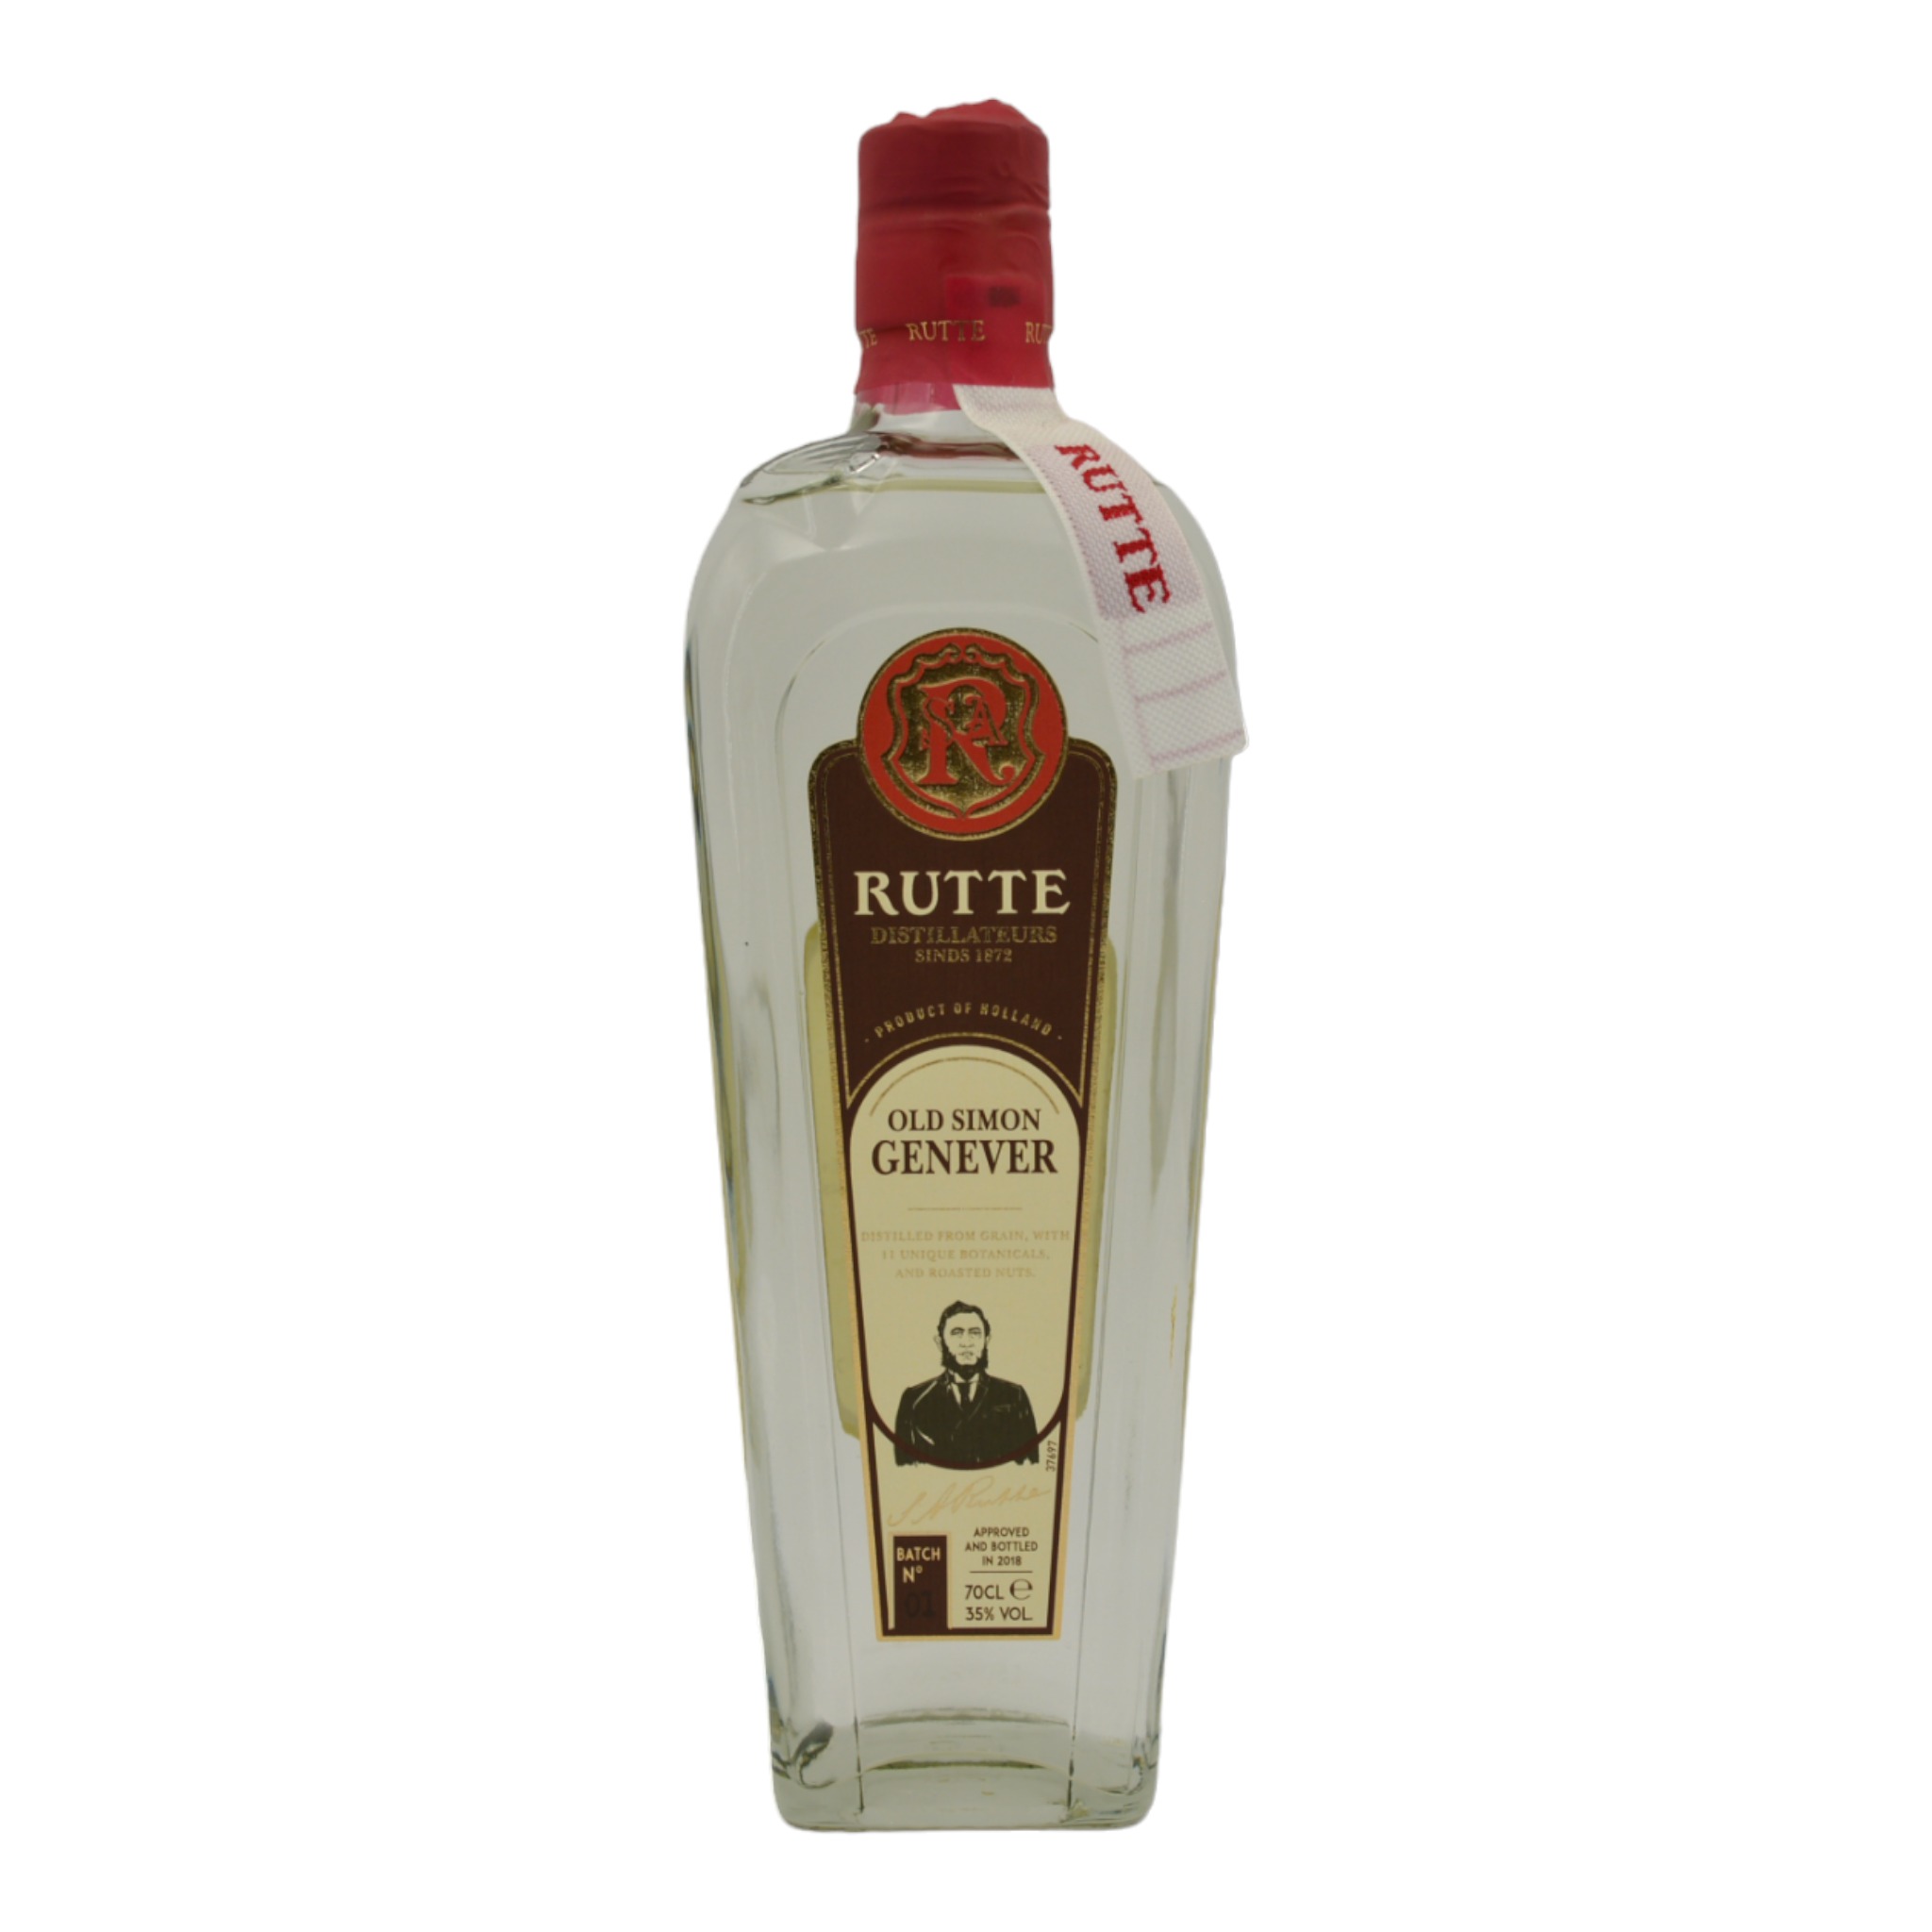 8710625011733Rutte Old Simon Genever Distilled from Grain with 11Unique Botanicals with roasted Nuts f - Weinhaus-Buecker